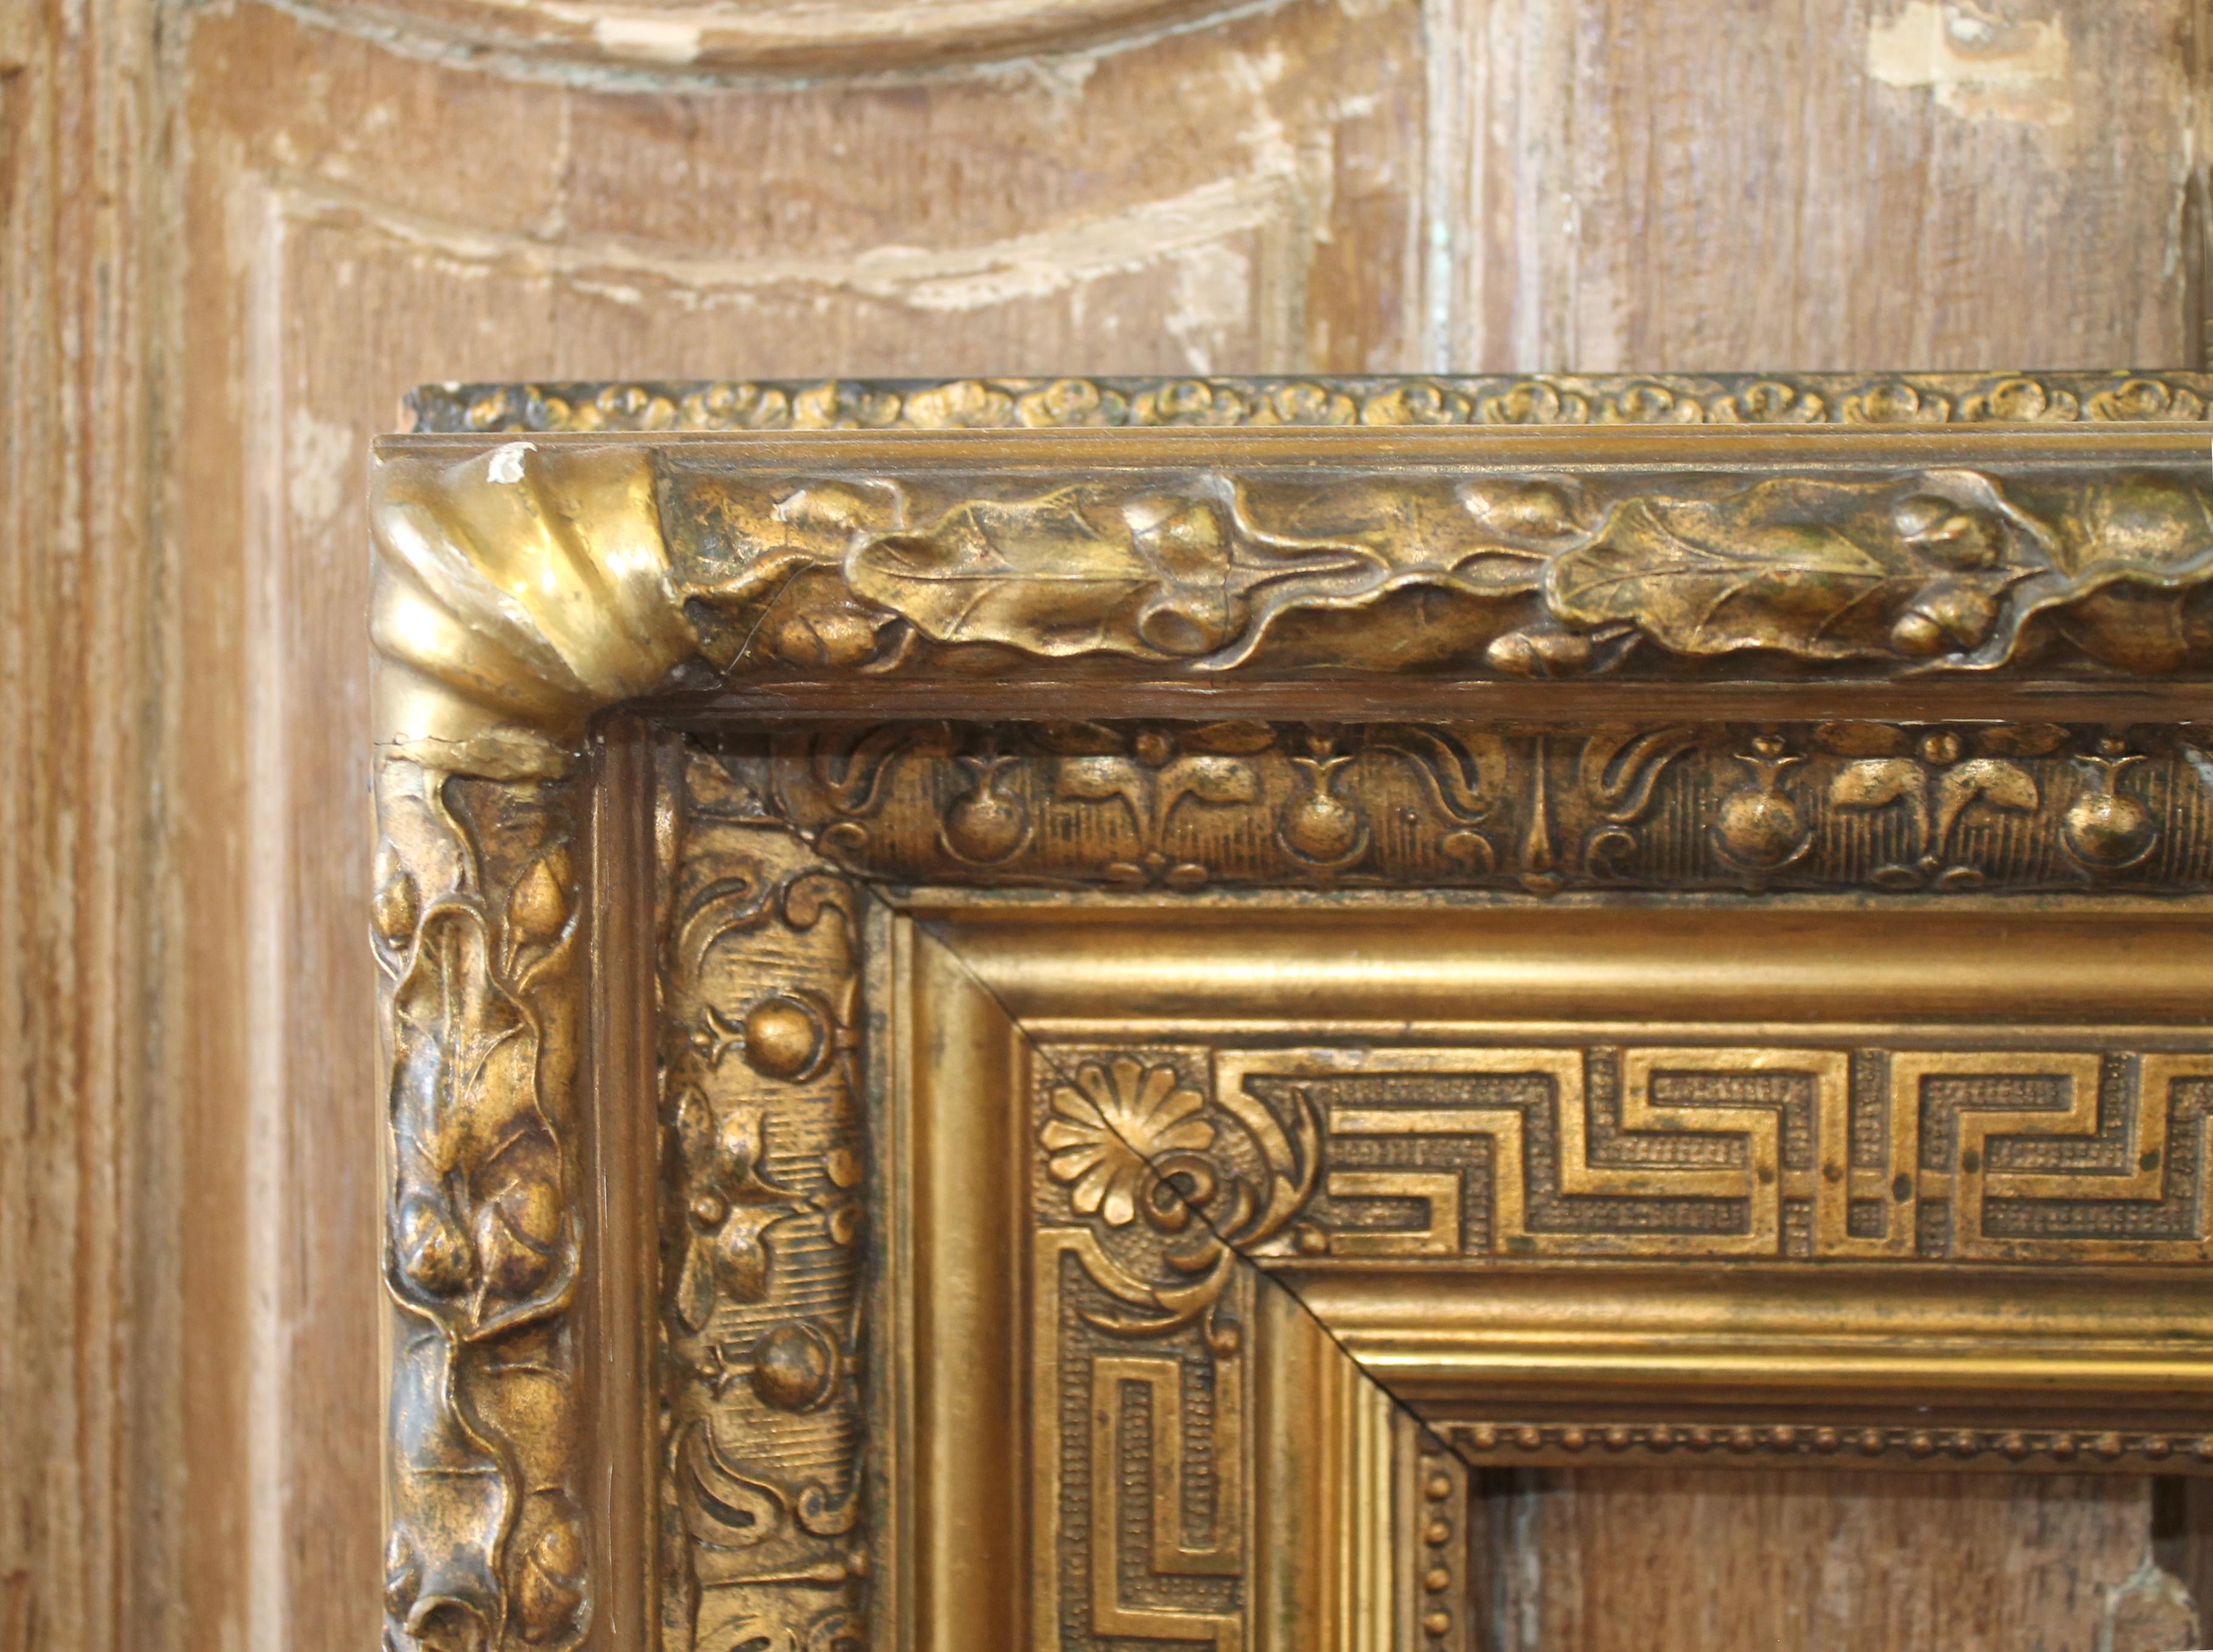 Decorative giltwood frame
Minor missing gesso, carvings to corners, overall in good sturdy condition. Please see photos of the corner.
Measures: 45.5